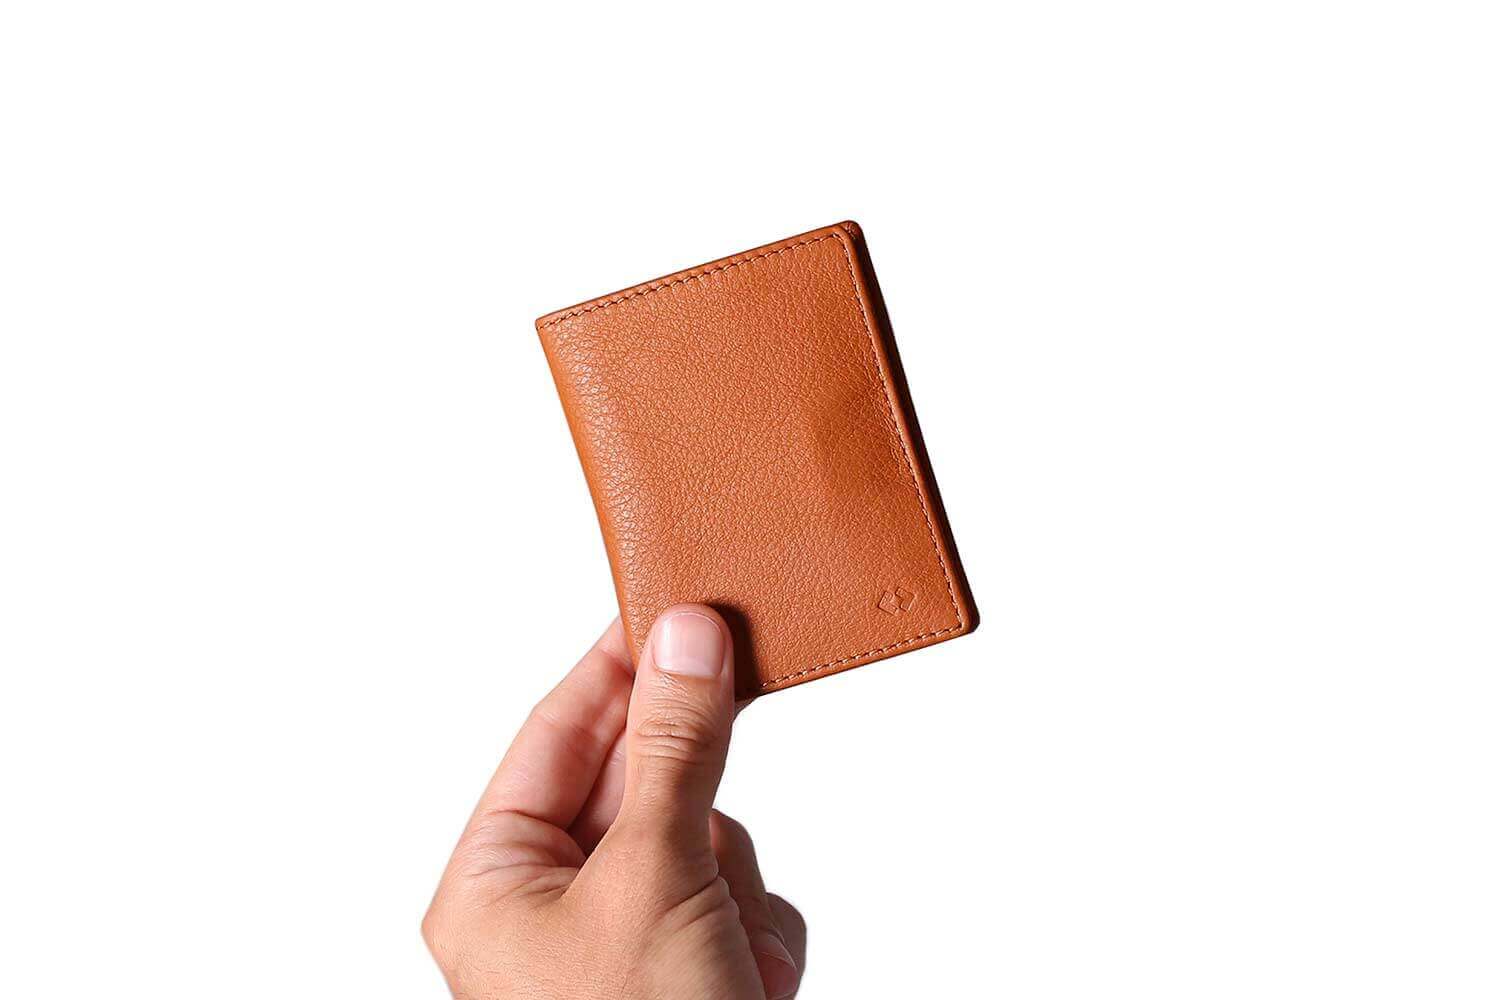 Wallet - Carry your cards and notes securely- Simplistic and Stylish